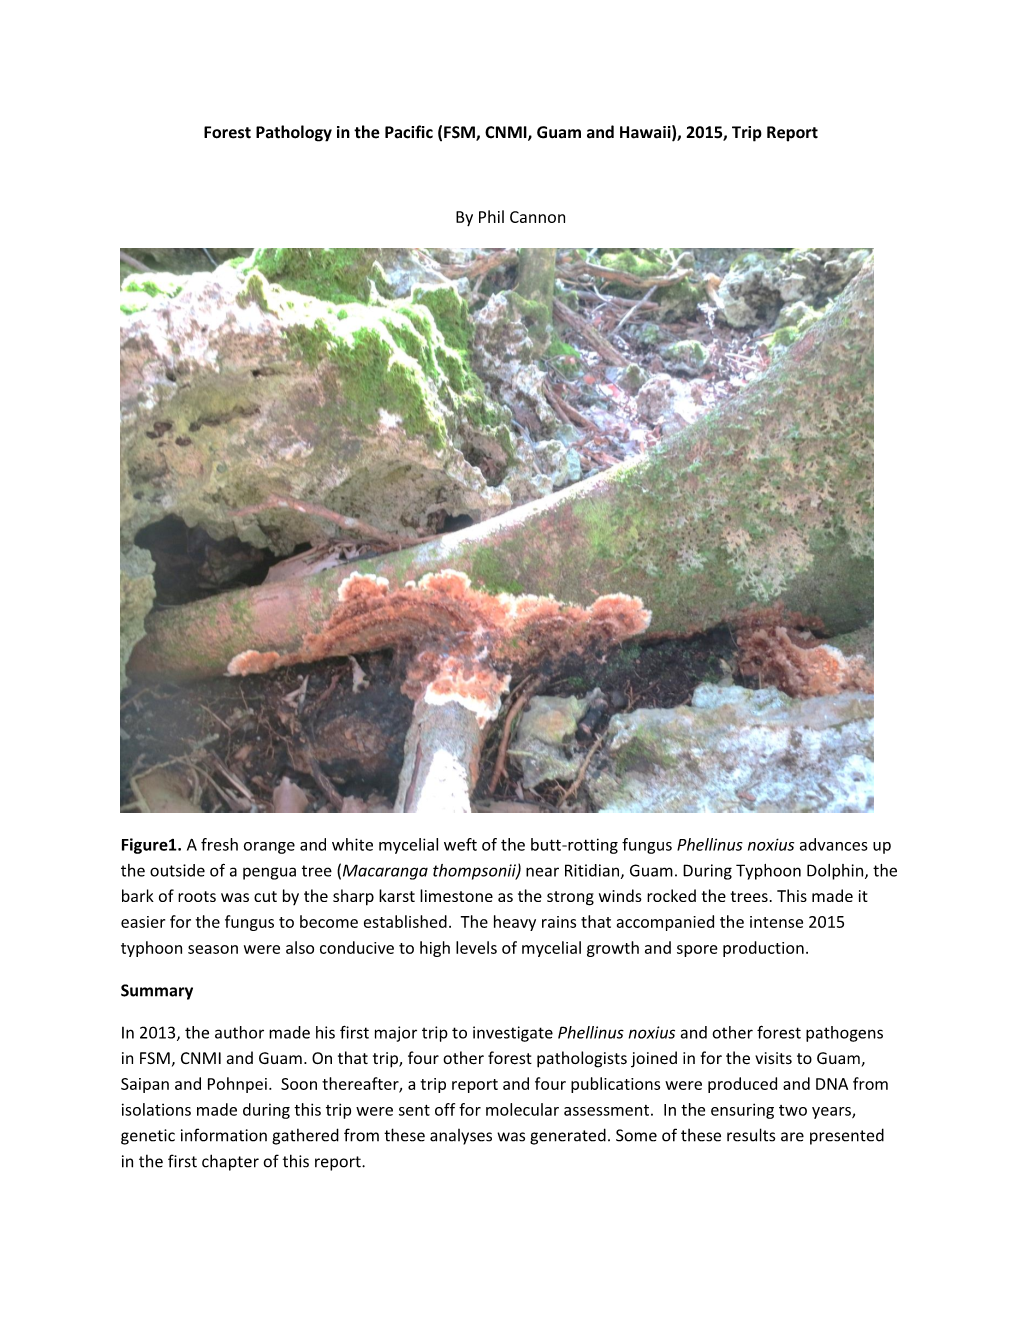 Forest Pathology in the Pacific (FSM, CNMI, Guam and Hawaii), 2015, Trip Report